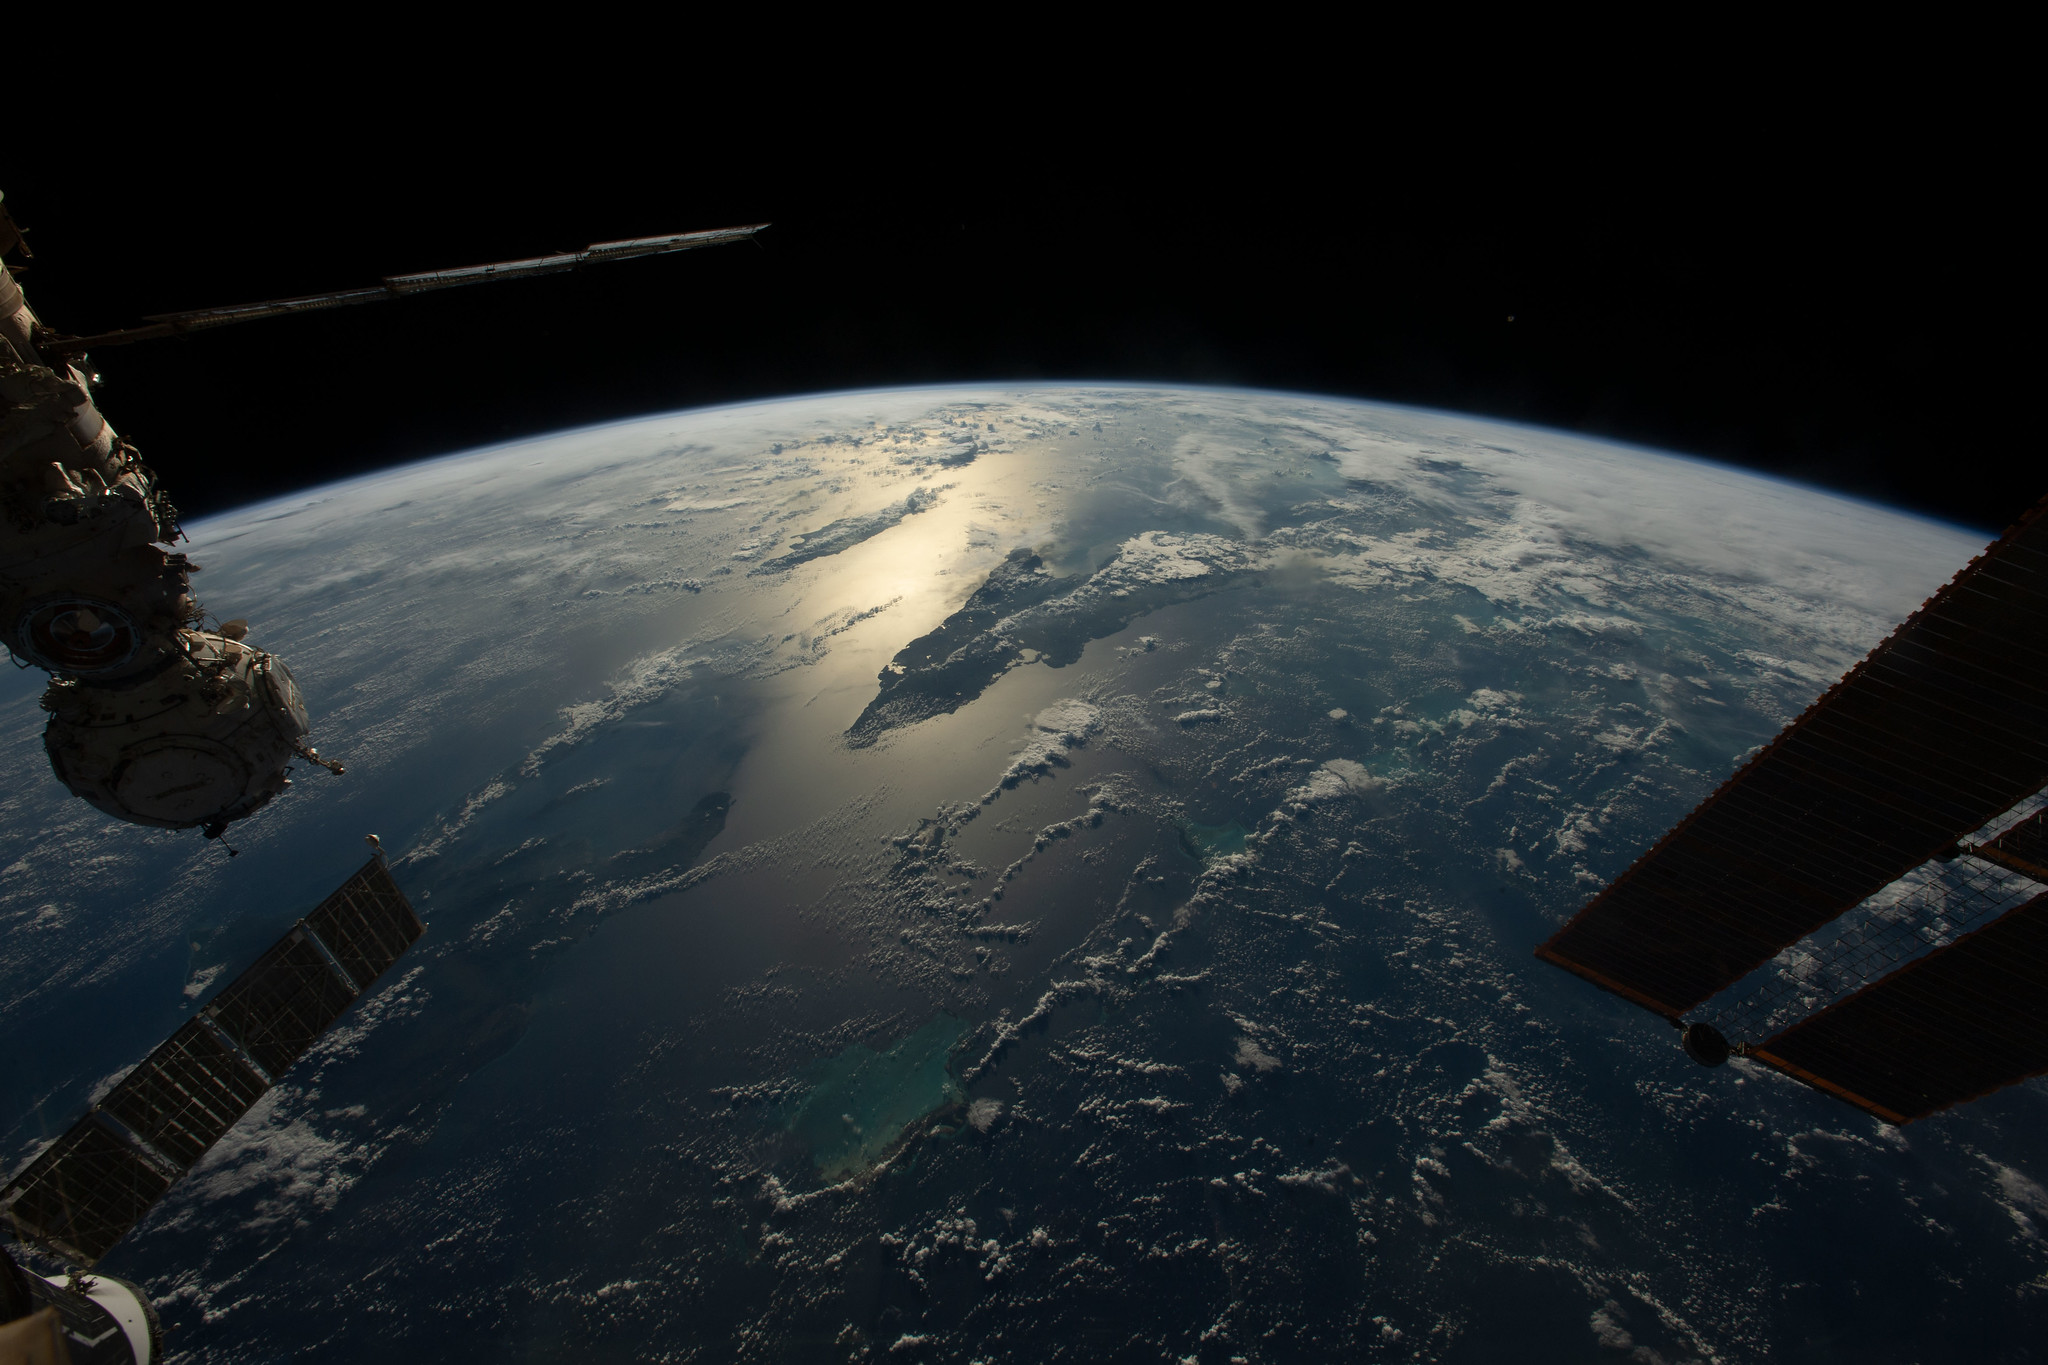 image of the Caribbean Sea and Atlantic Ocean, with Cuba and Haiti in the foreground, are visible in this photograph from the International Space Station as it orbits 258 miles above. 